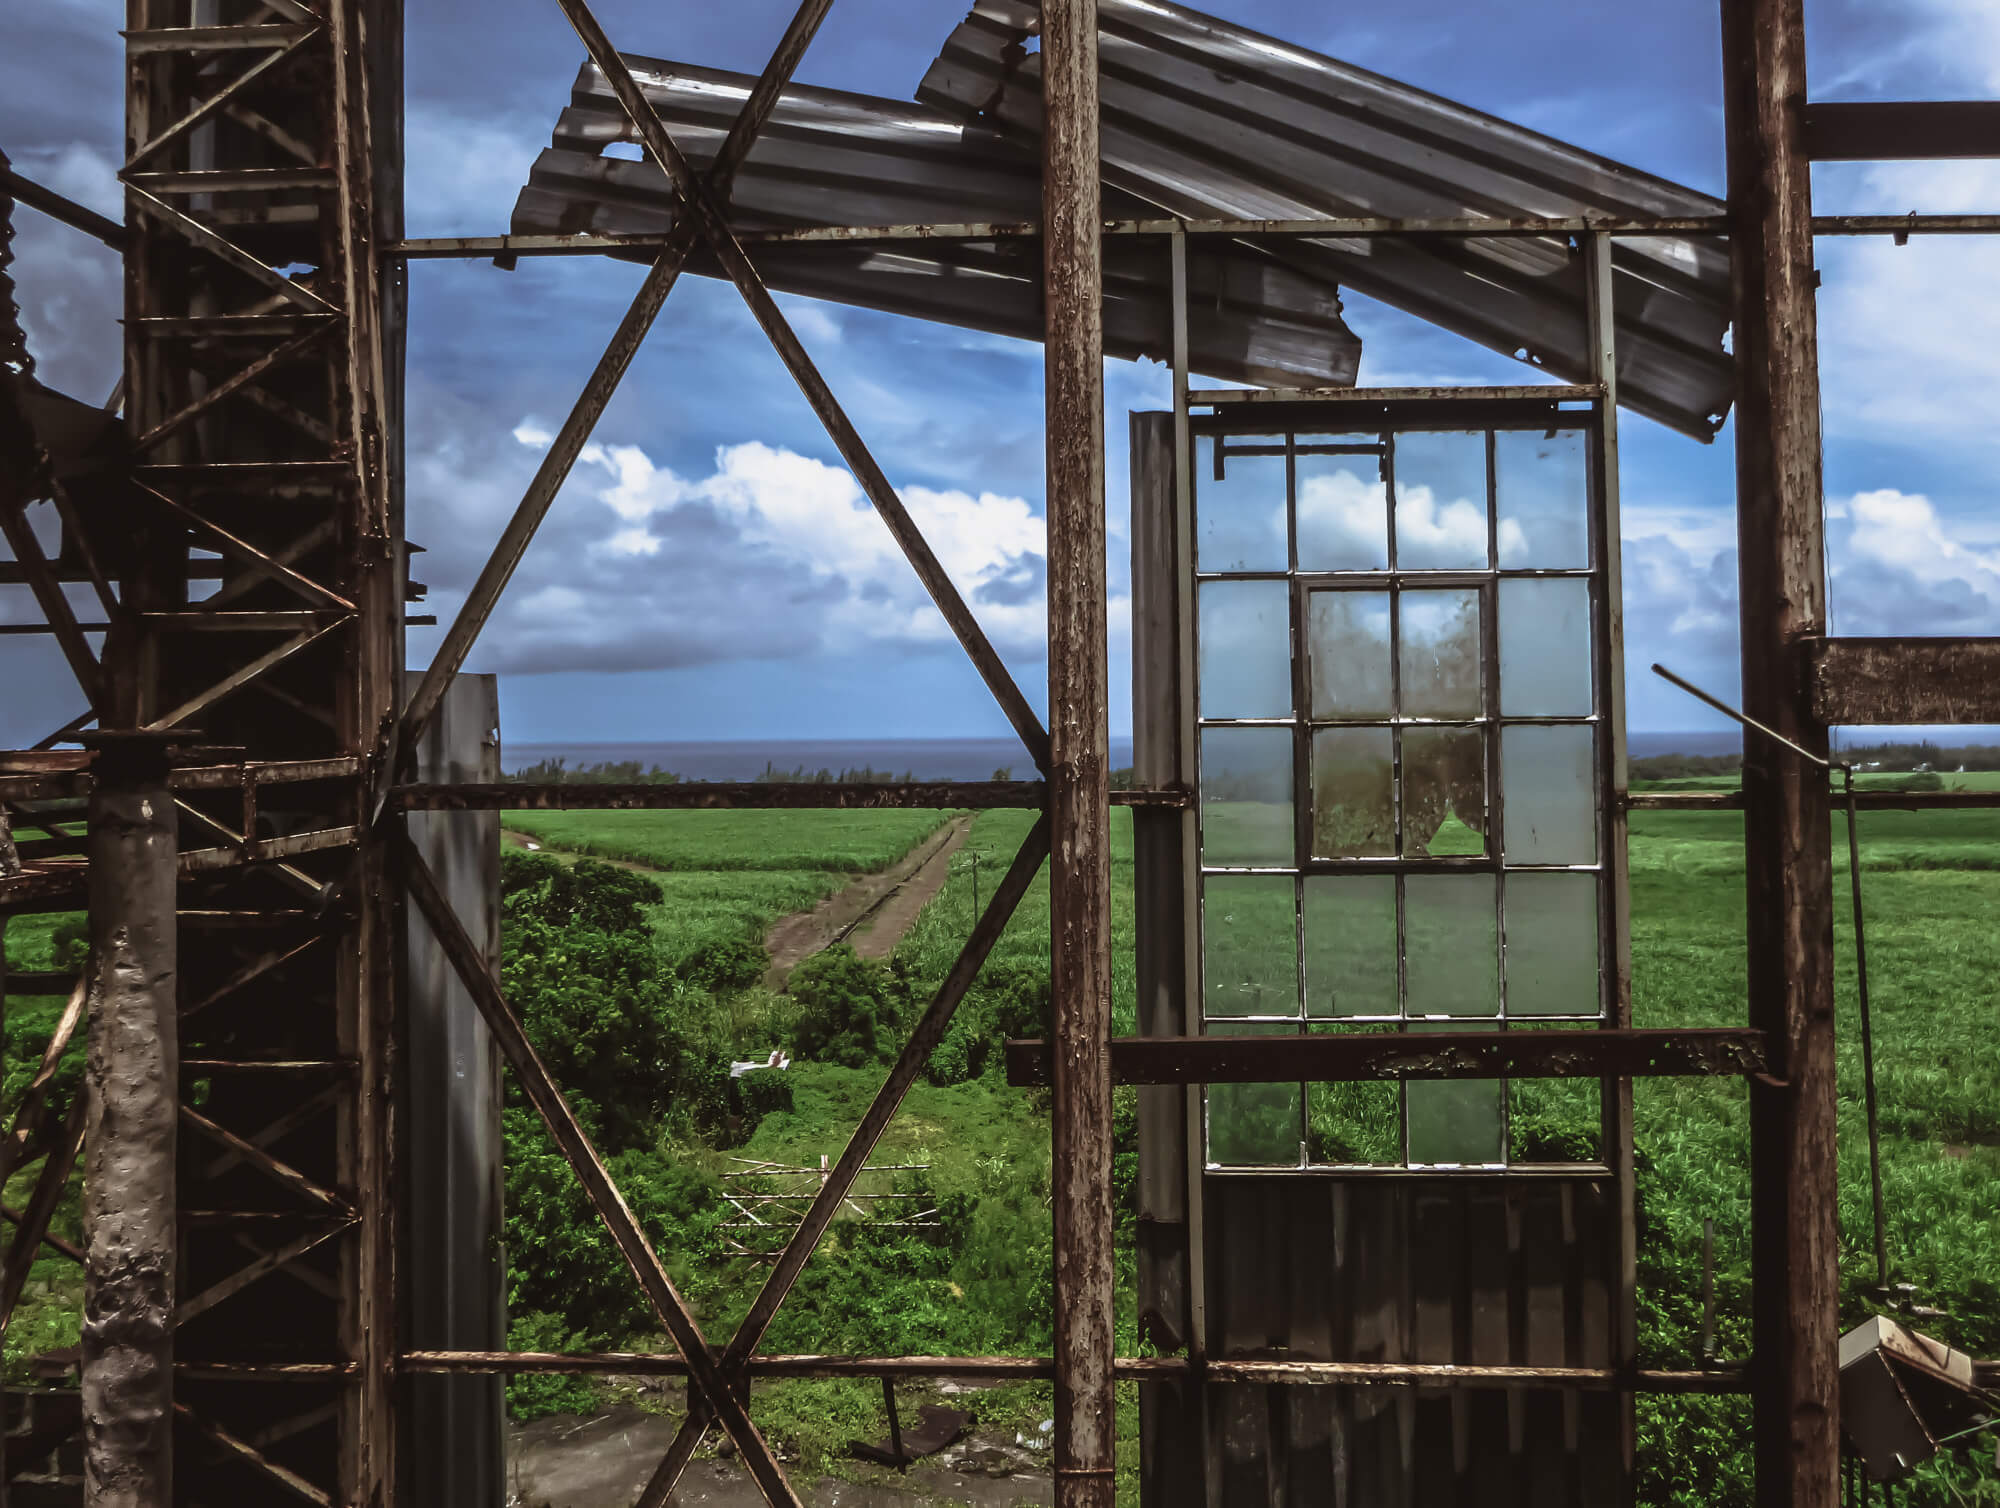 View from a derelict sugarcane factory - an unexplored place in Mauritius